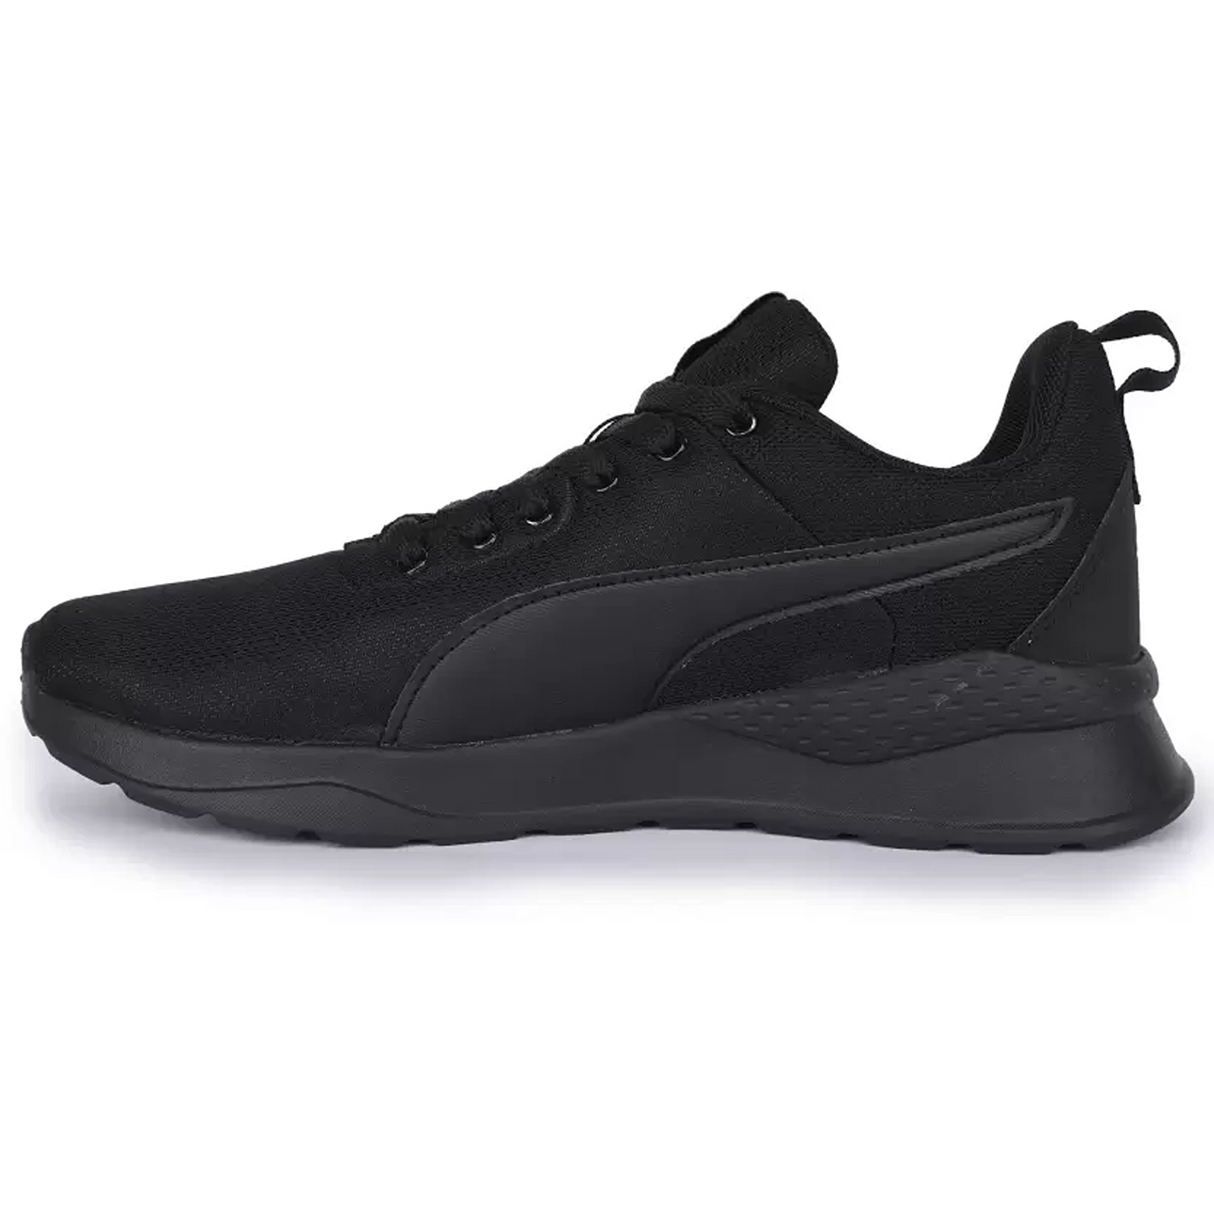 #Exclusive Puma Radcliff Sports Training & Gym Shoes For Men (39420502)